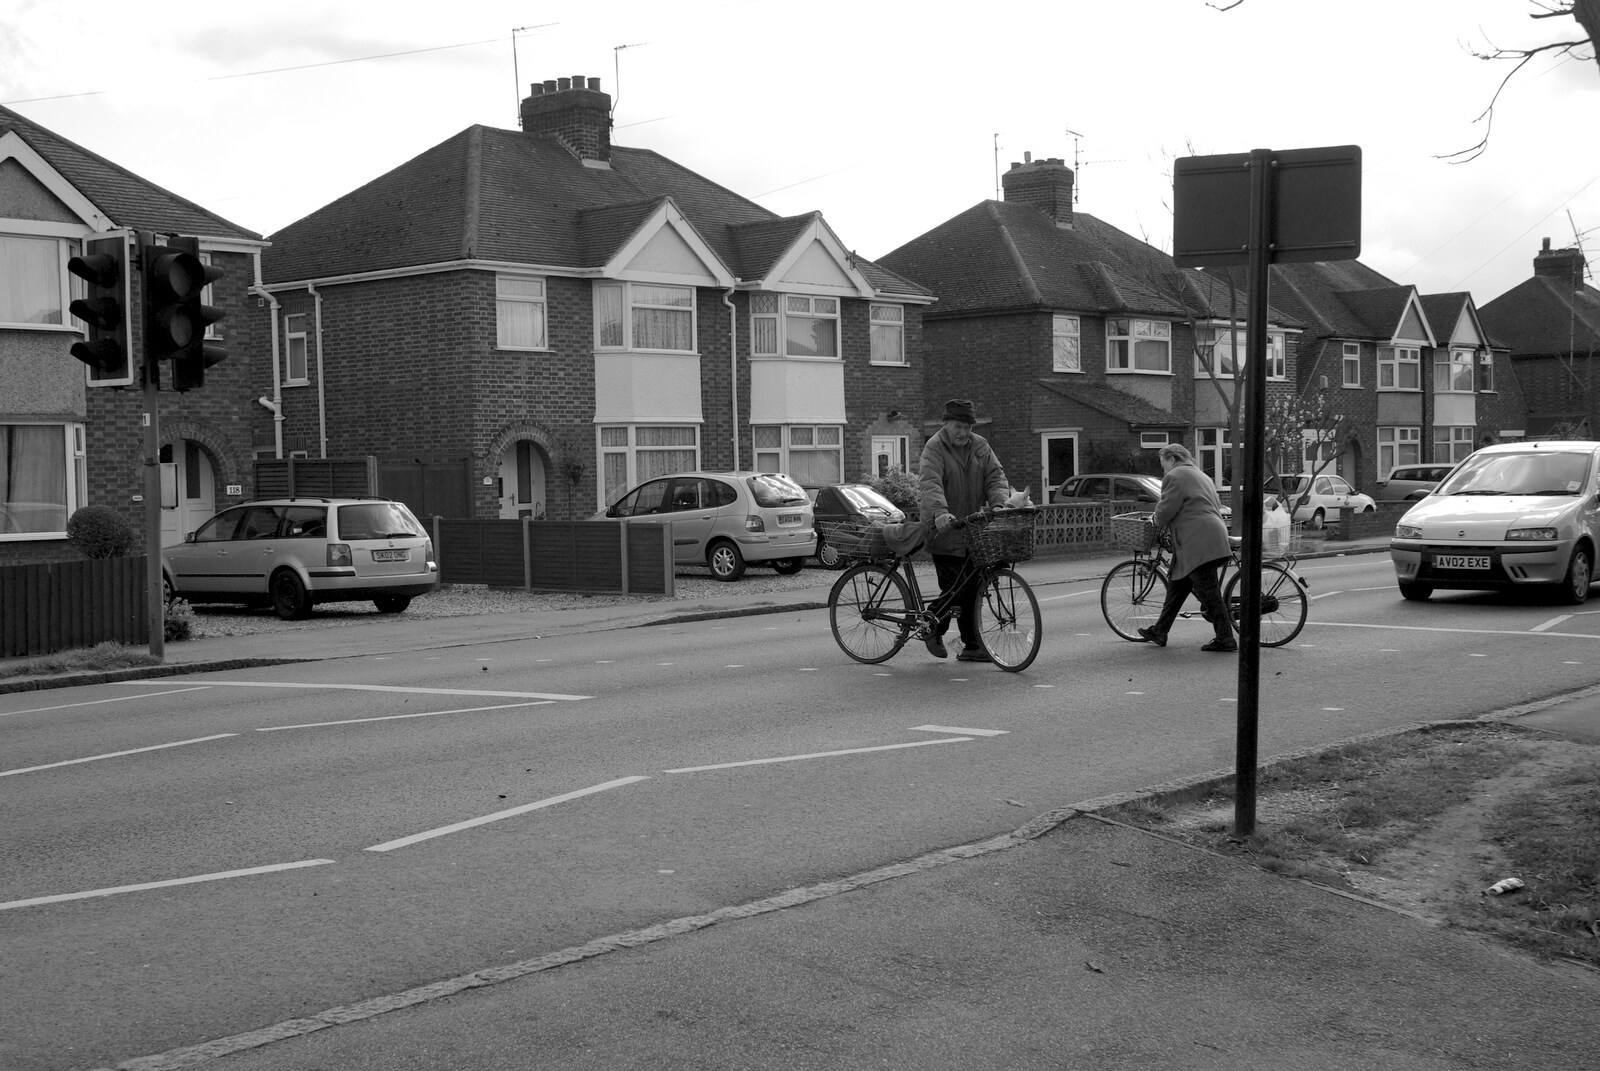 Isobel's House Warming, a Gospel Hall, and Derelict Newsagents, Ward Road, Cambridge - 17th March 2007: A couple of cyclists cross the road